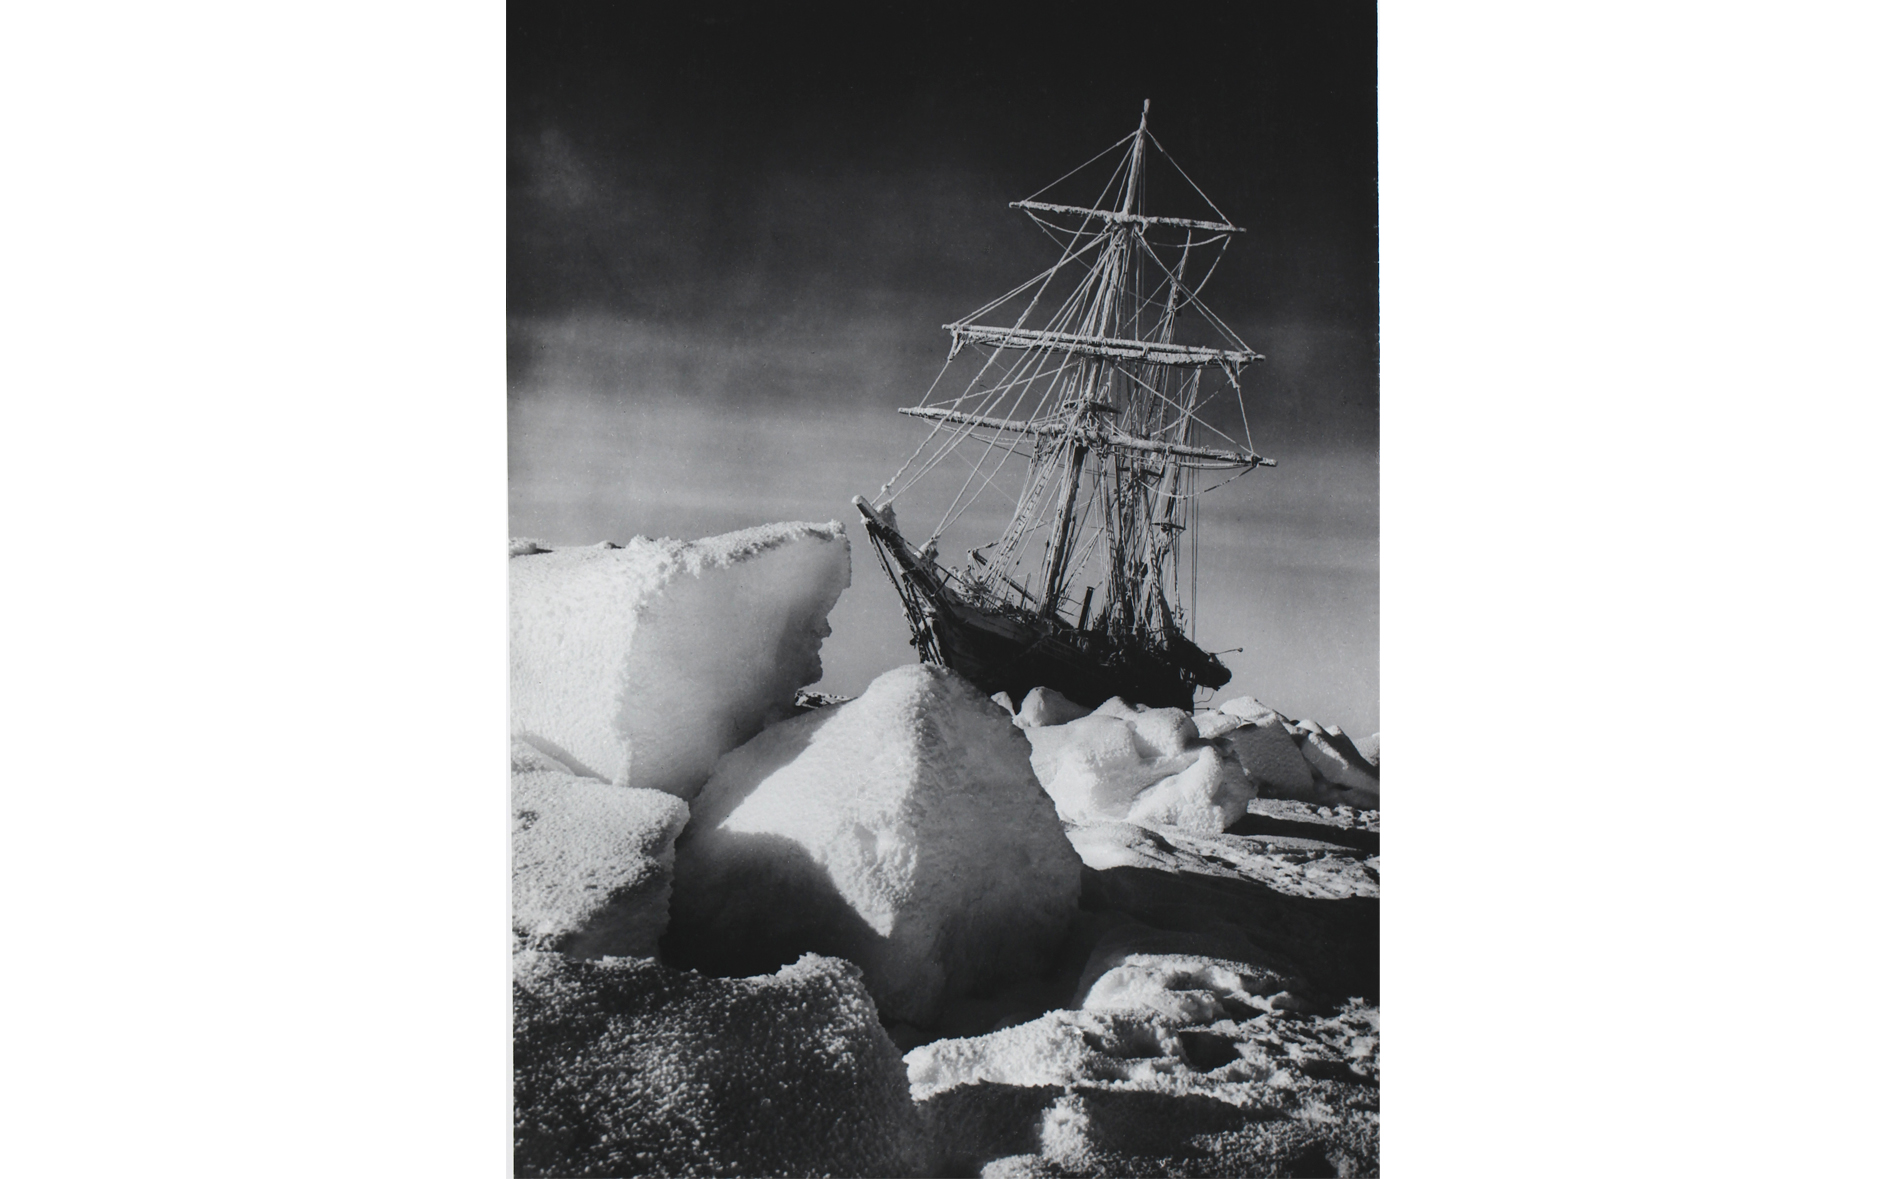 Frank Hurley, printed for The Royal Geographic Society